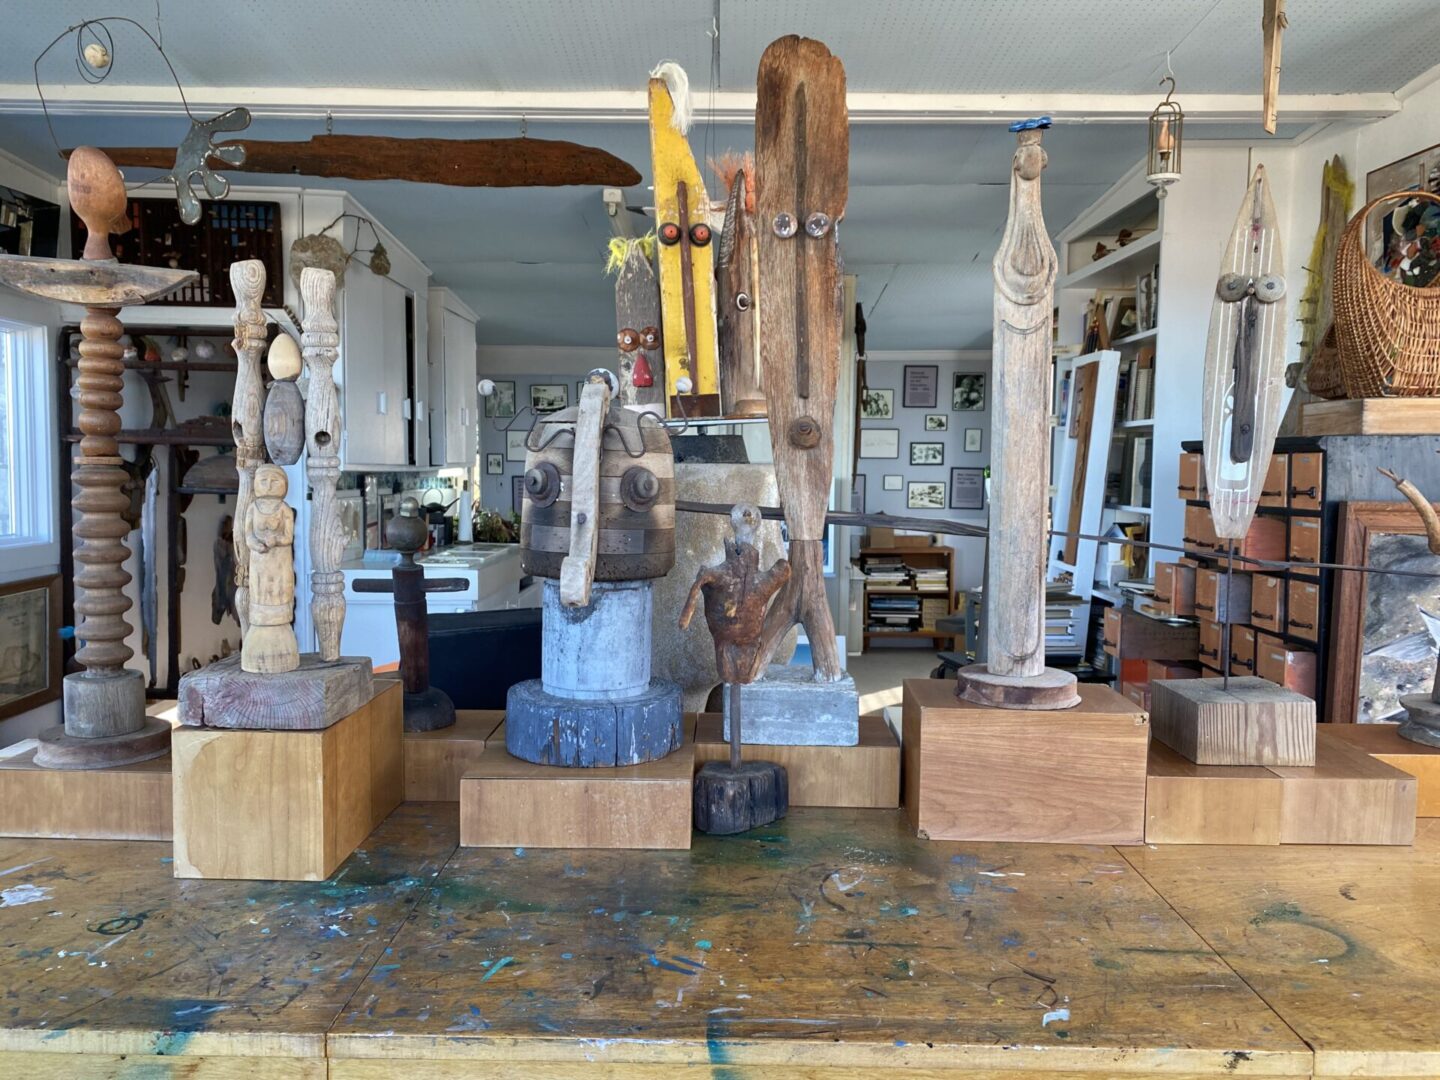 A selection of Mabel's Assemblage pieces at the D'Amico Home and Studio.
Photo by Eva Iacono.